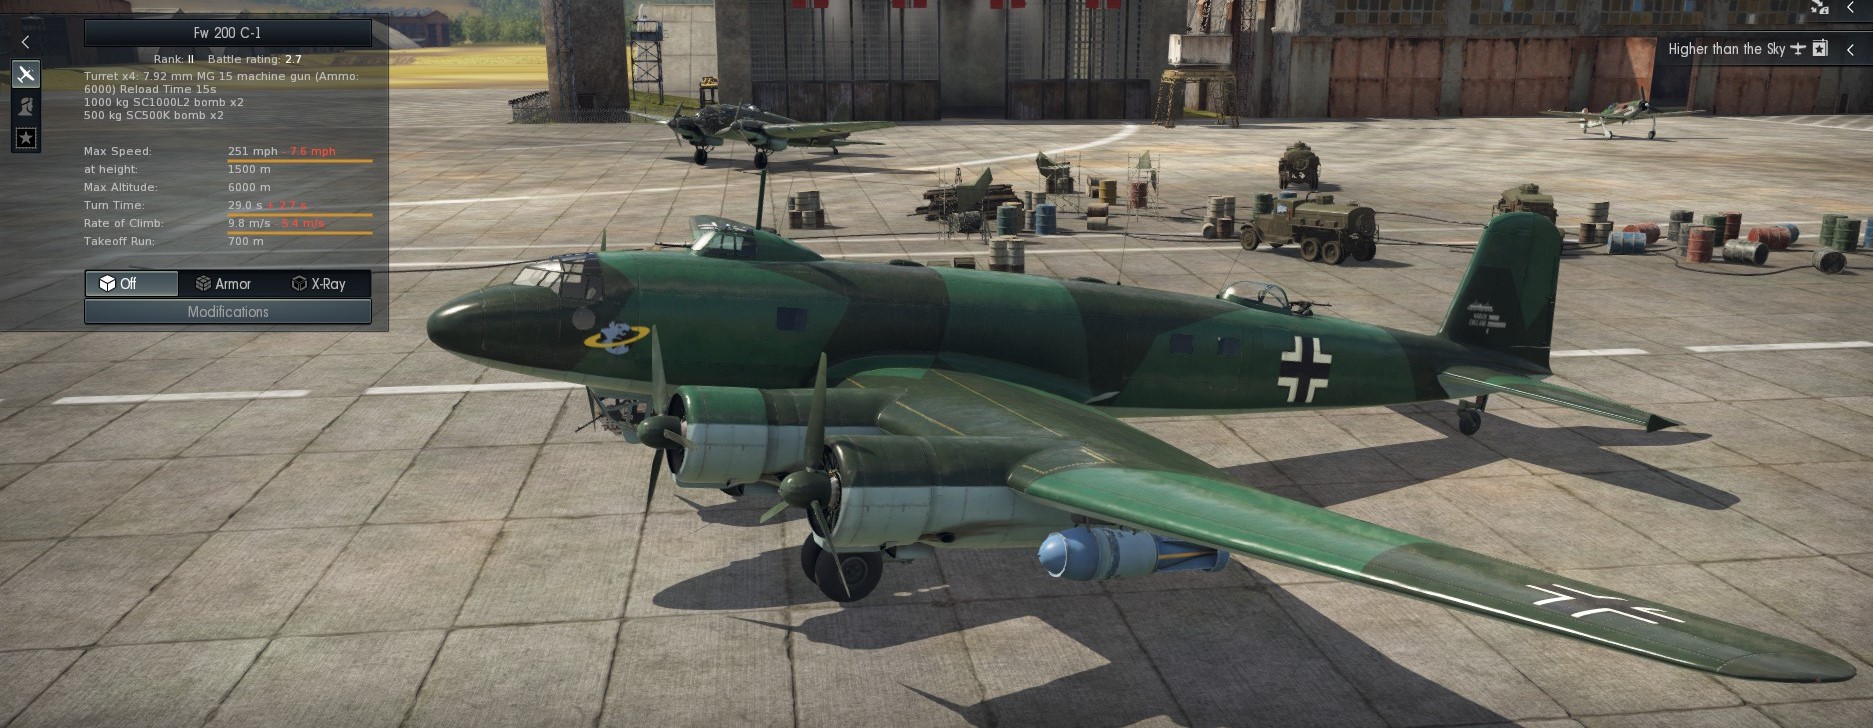 Steam Community Guide Collective Guide For Aircraft In War Thunder